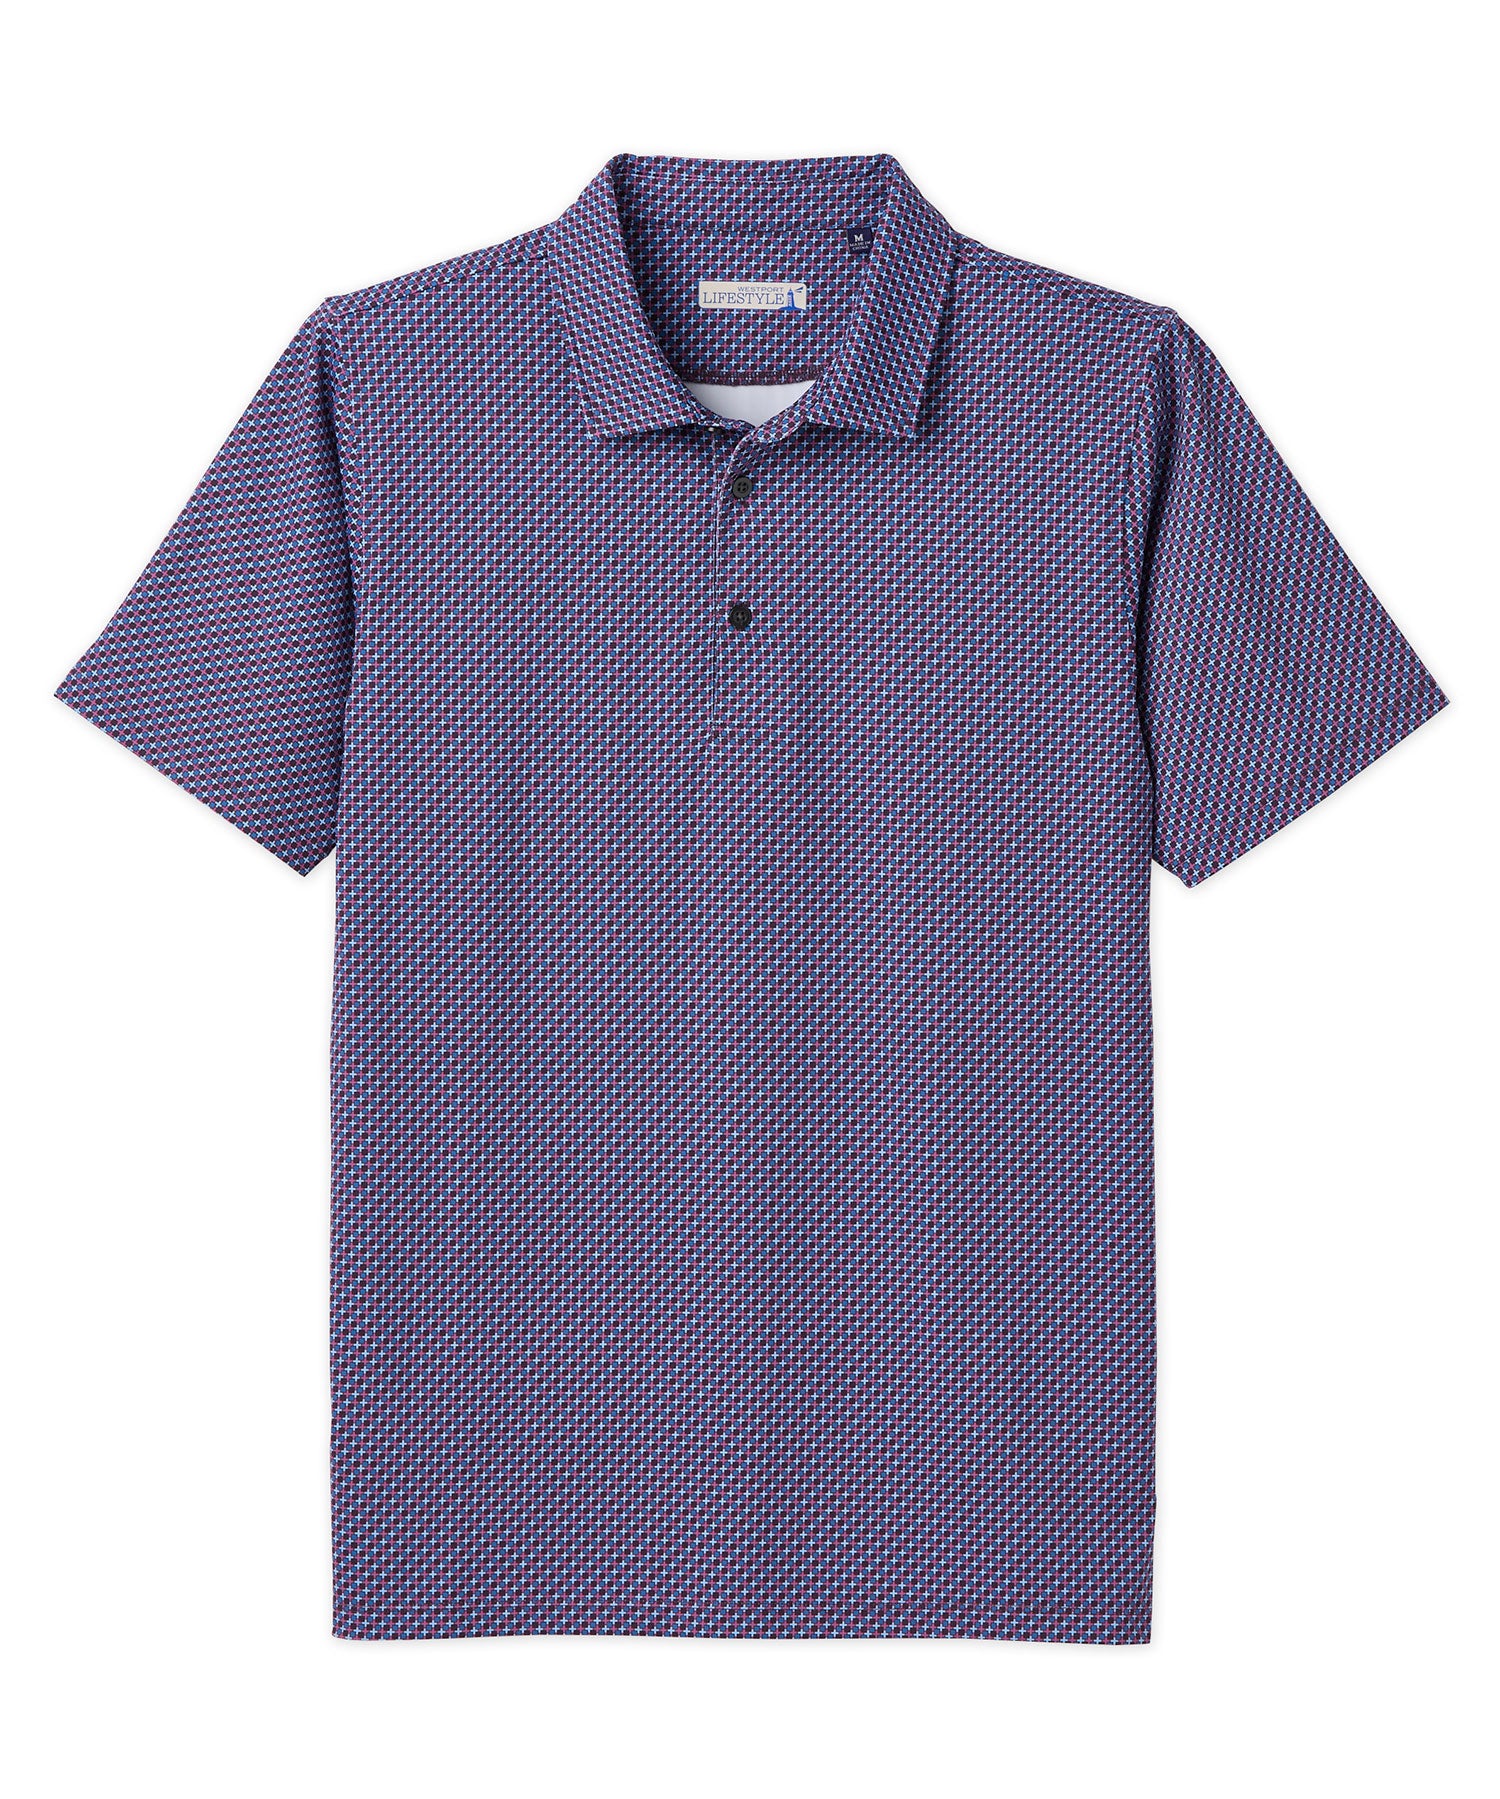 Stretch Performance Knit Wicking Recycled Polyester - Violet